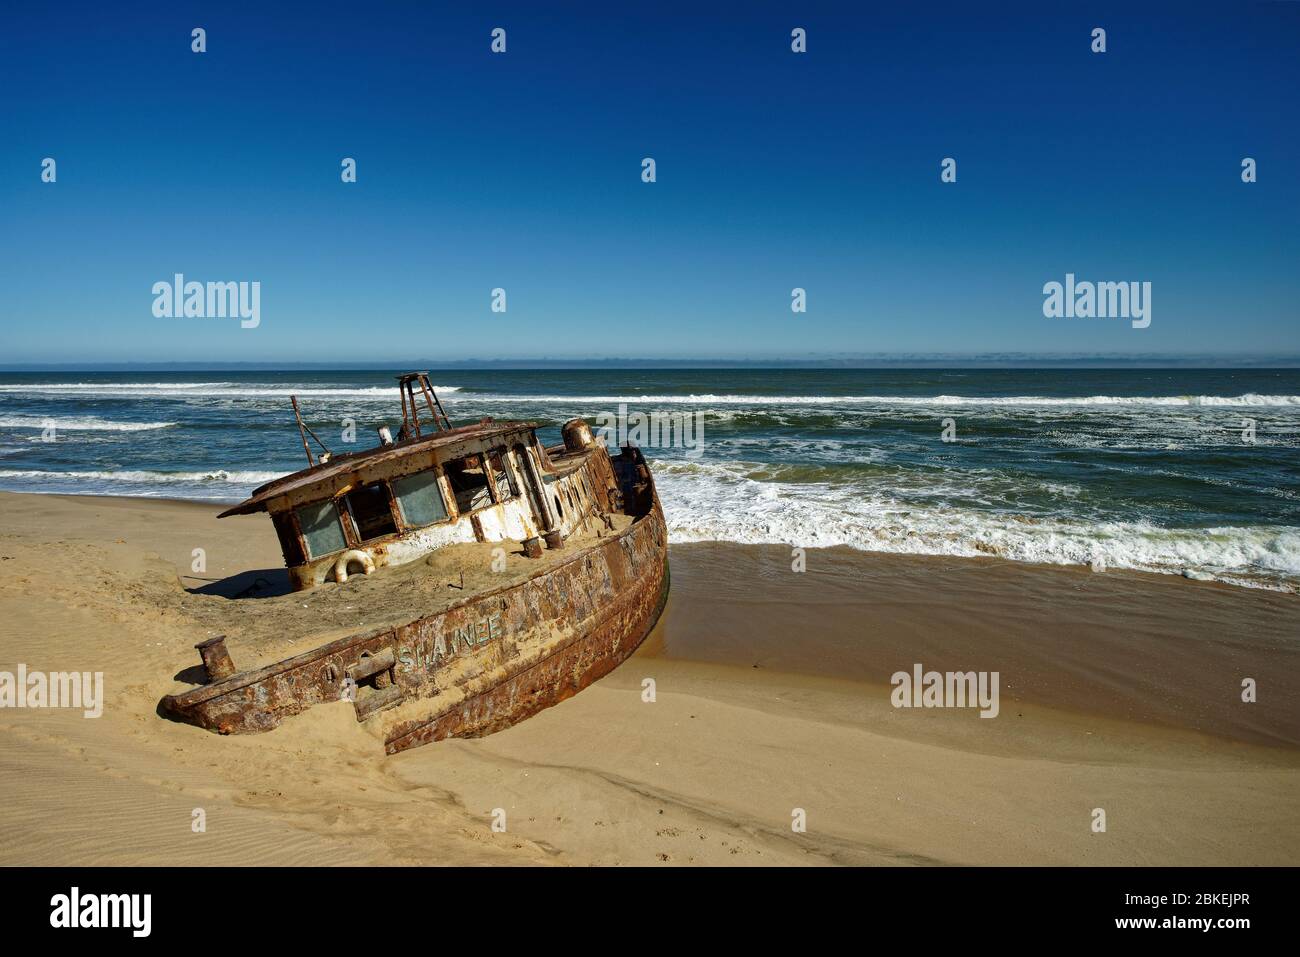 Shawnee shipwreck that was wrecked on the Skeleton Coast of Namibia, Atlantic coast of south west Africa. Stock Photo